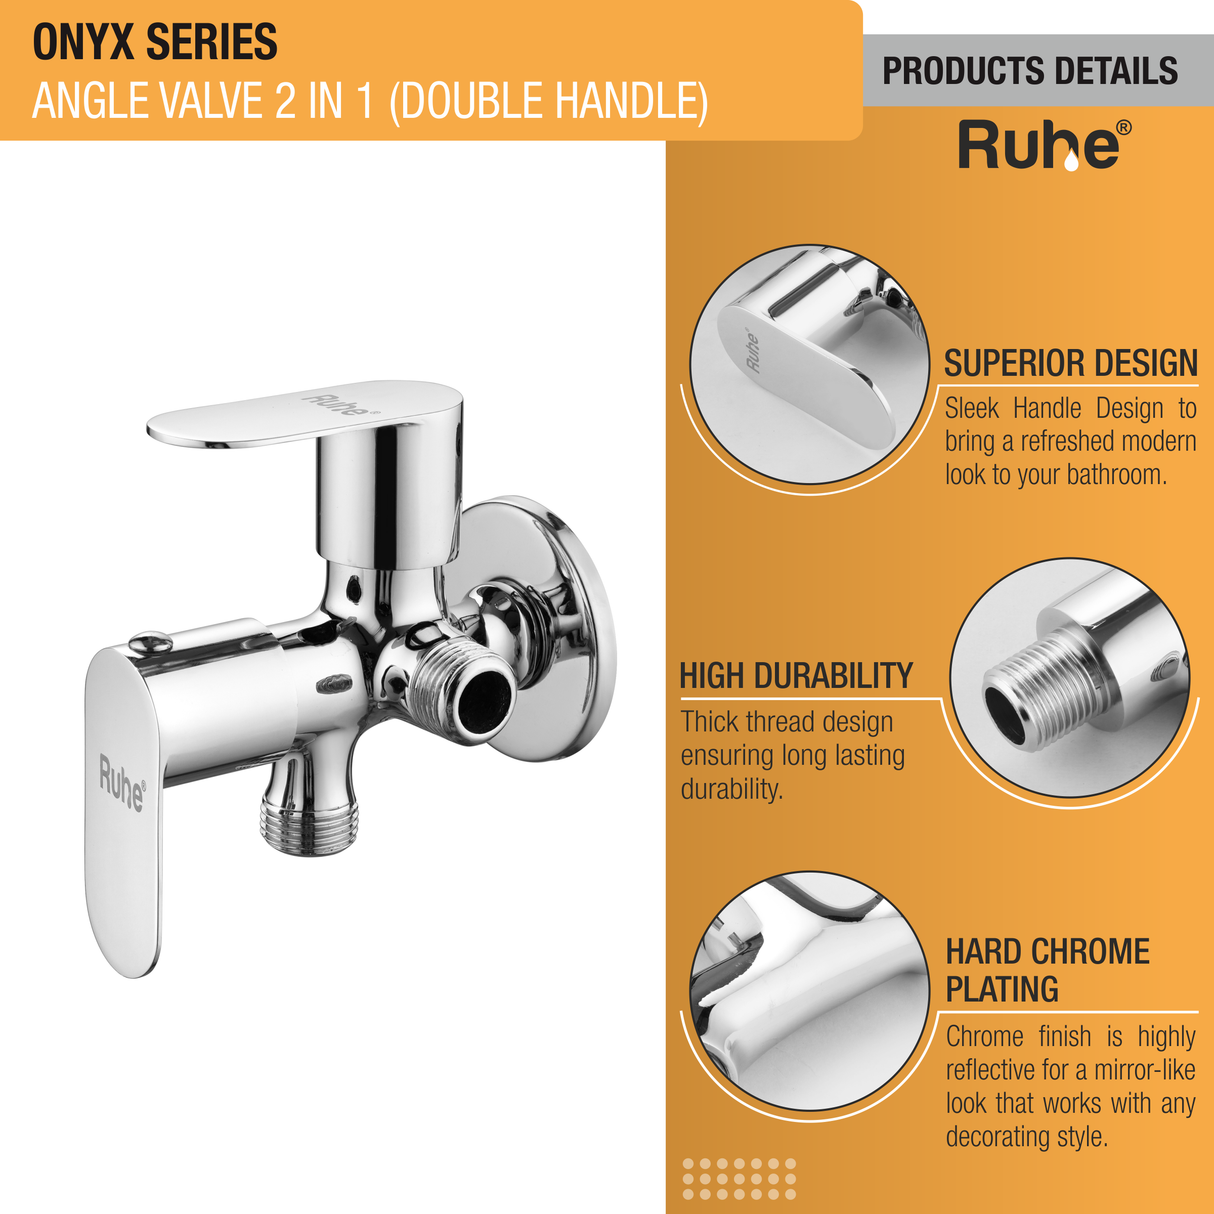 Onyx Two Way Angle Valve Brass Faucet (Double Handle) product details